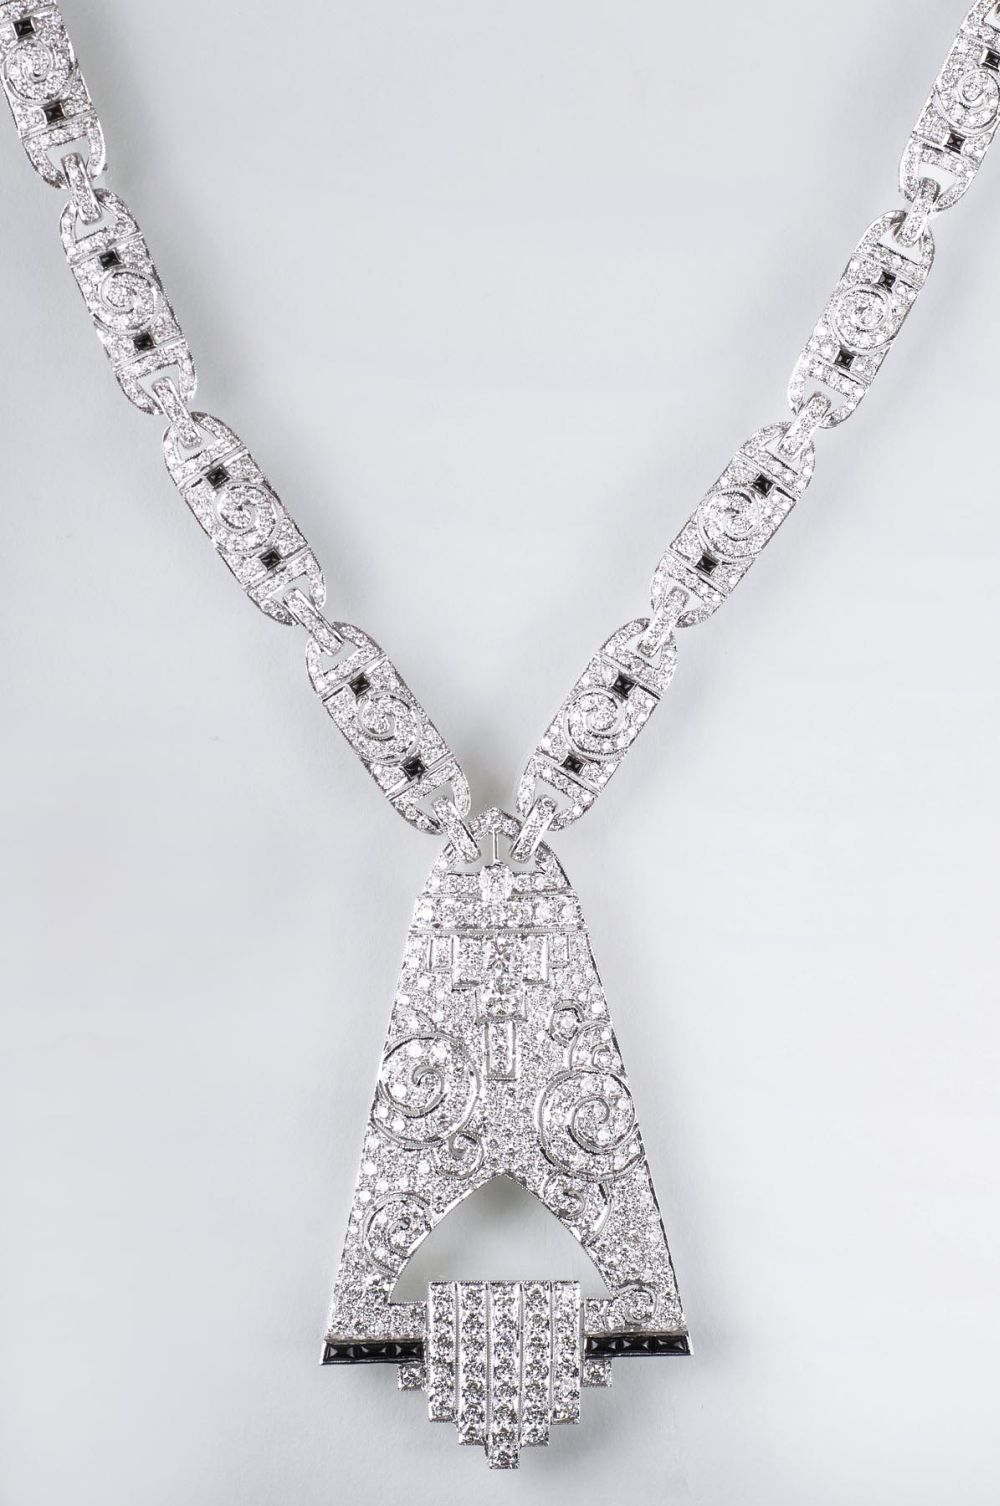 An exceptional, highcarat Diamond Necklace in Art-déco style